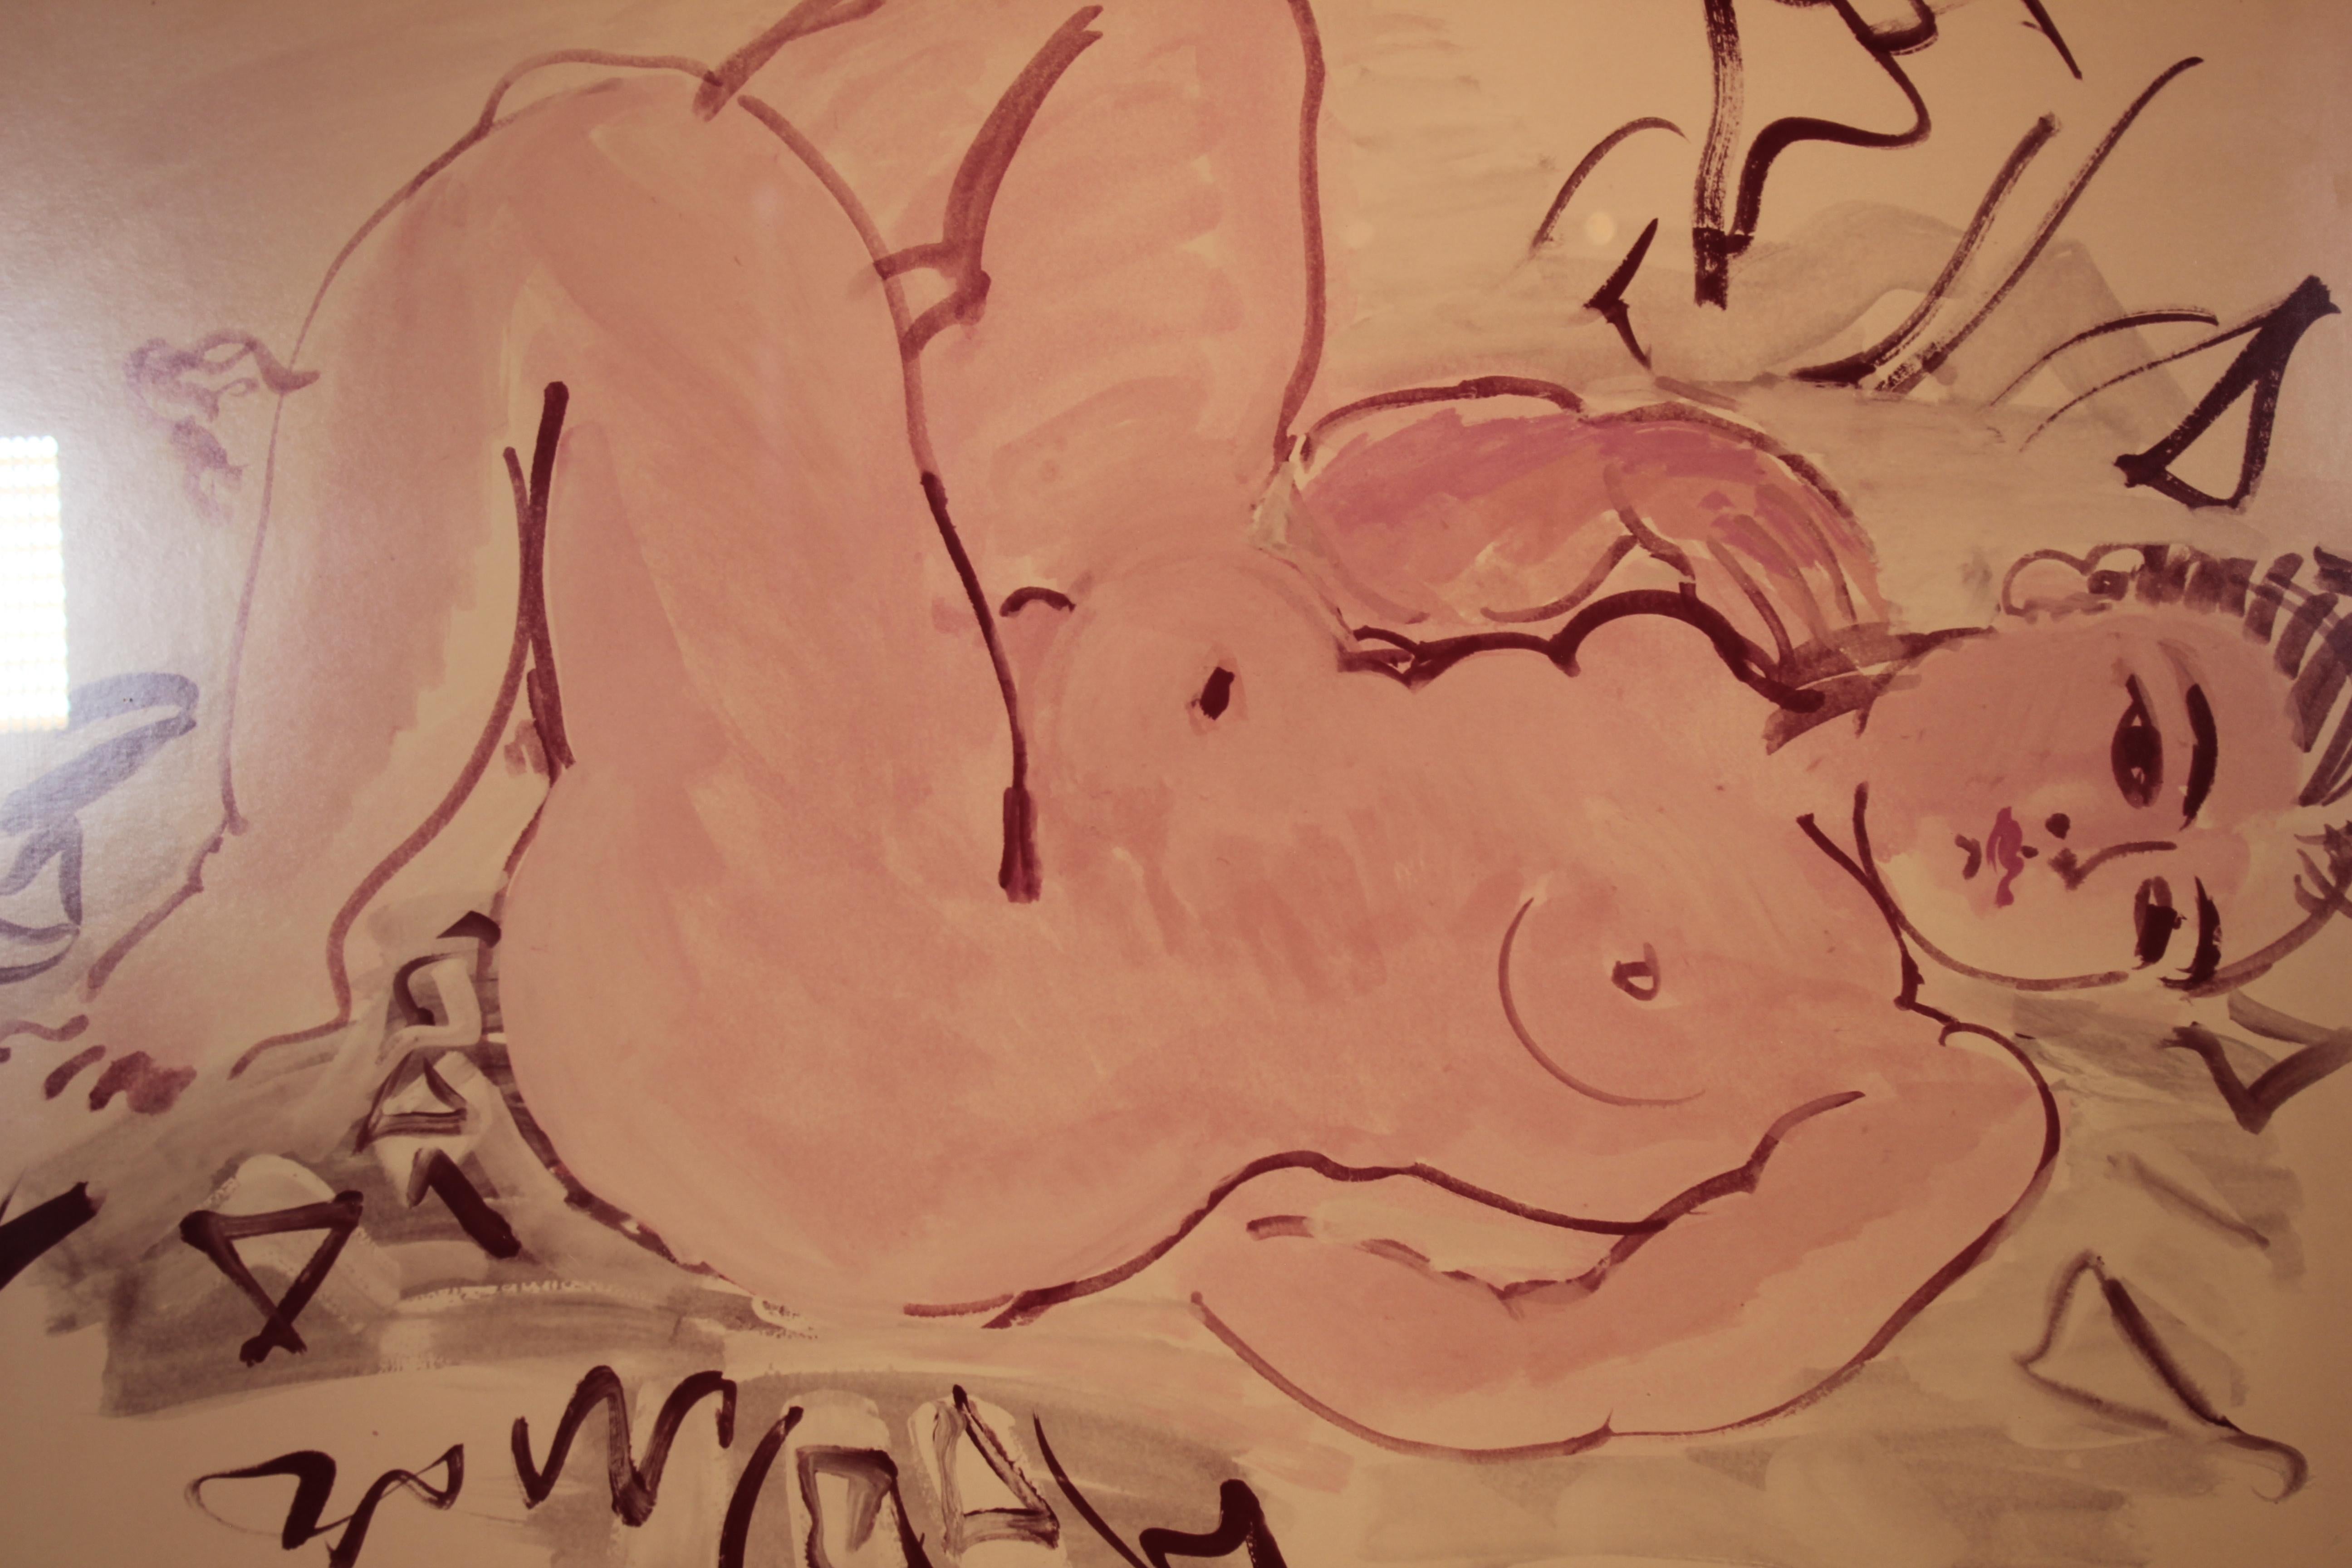 the draftsman drawing a reclining nude